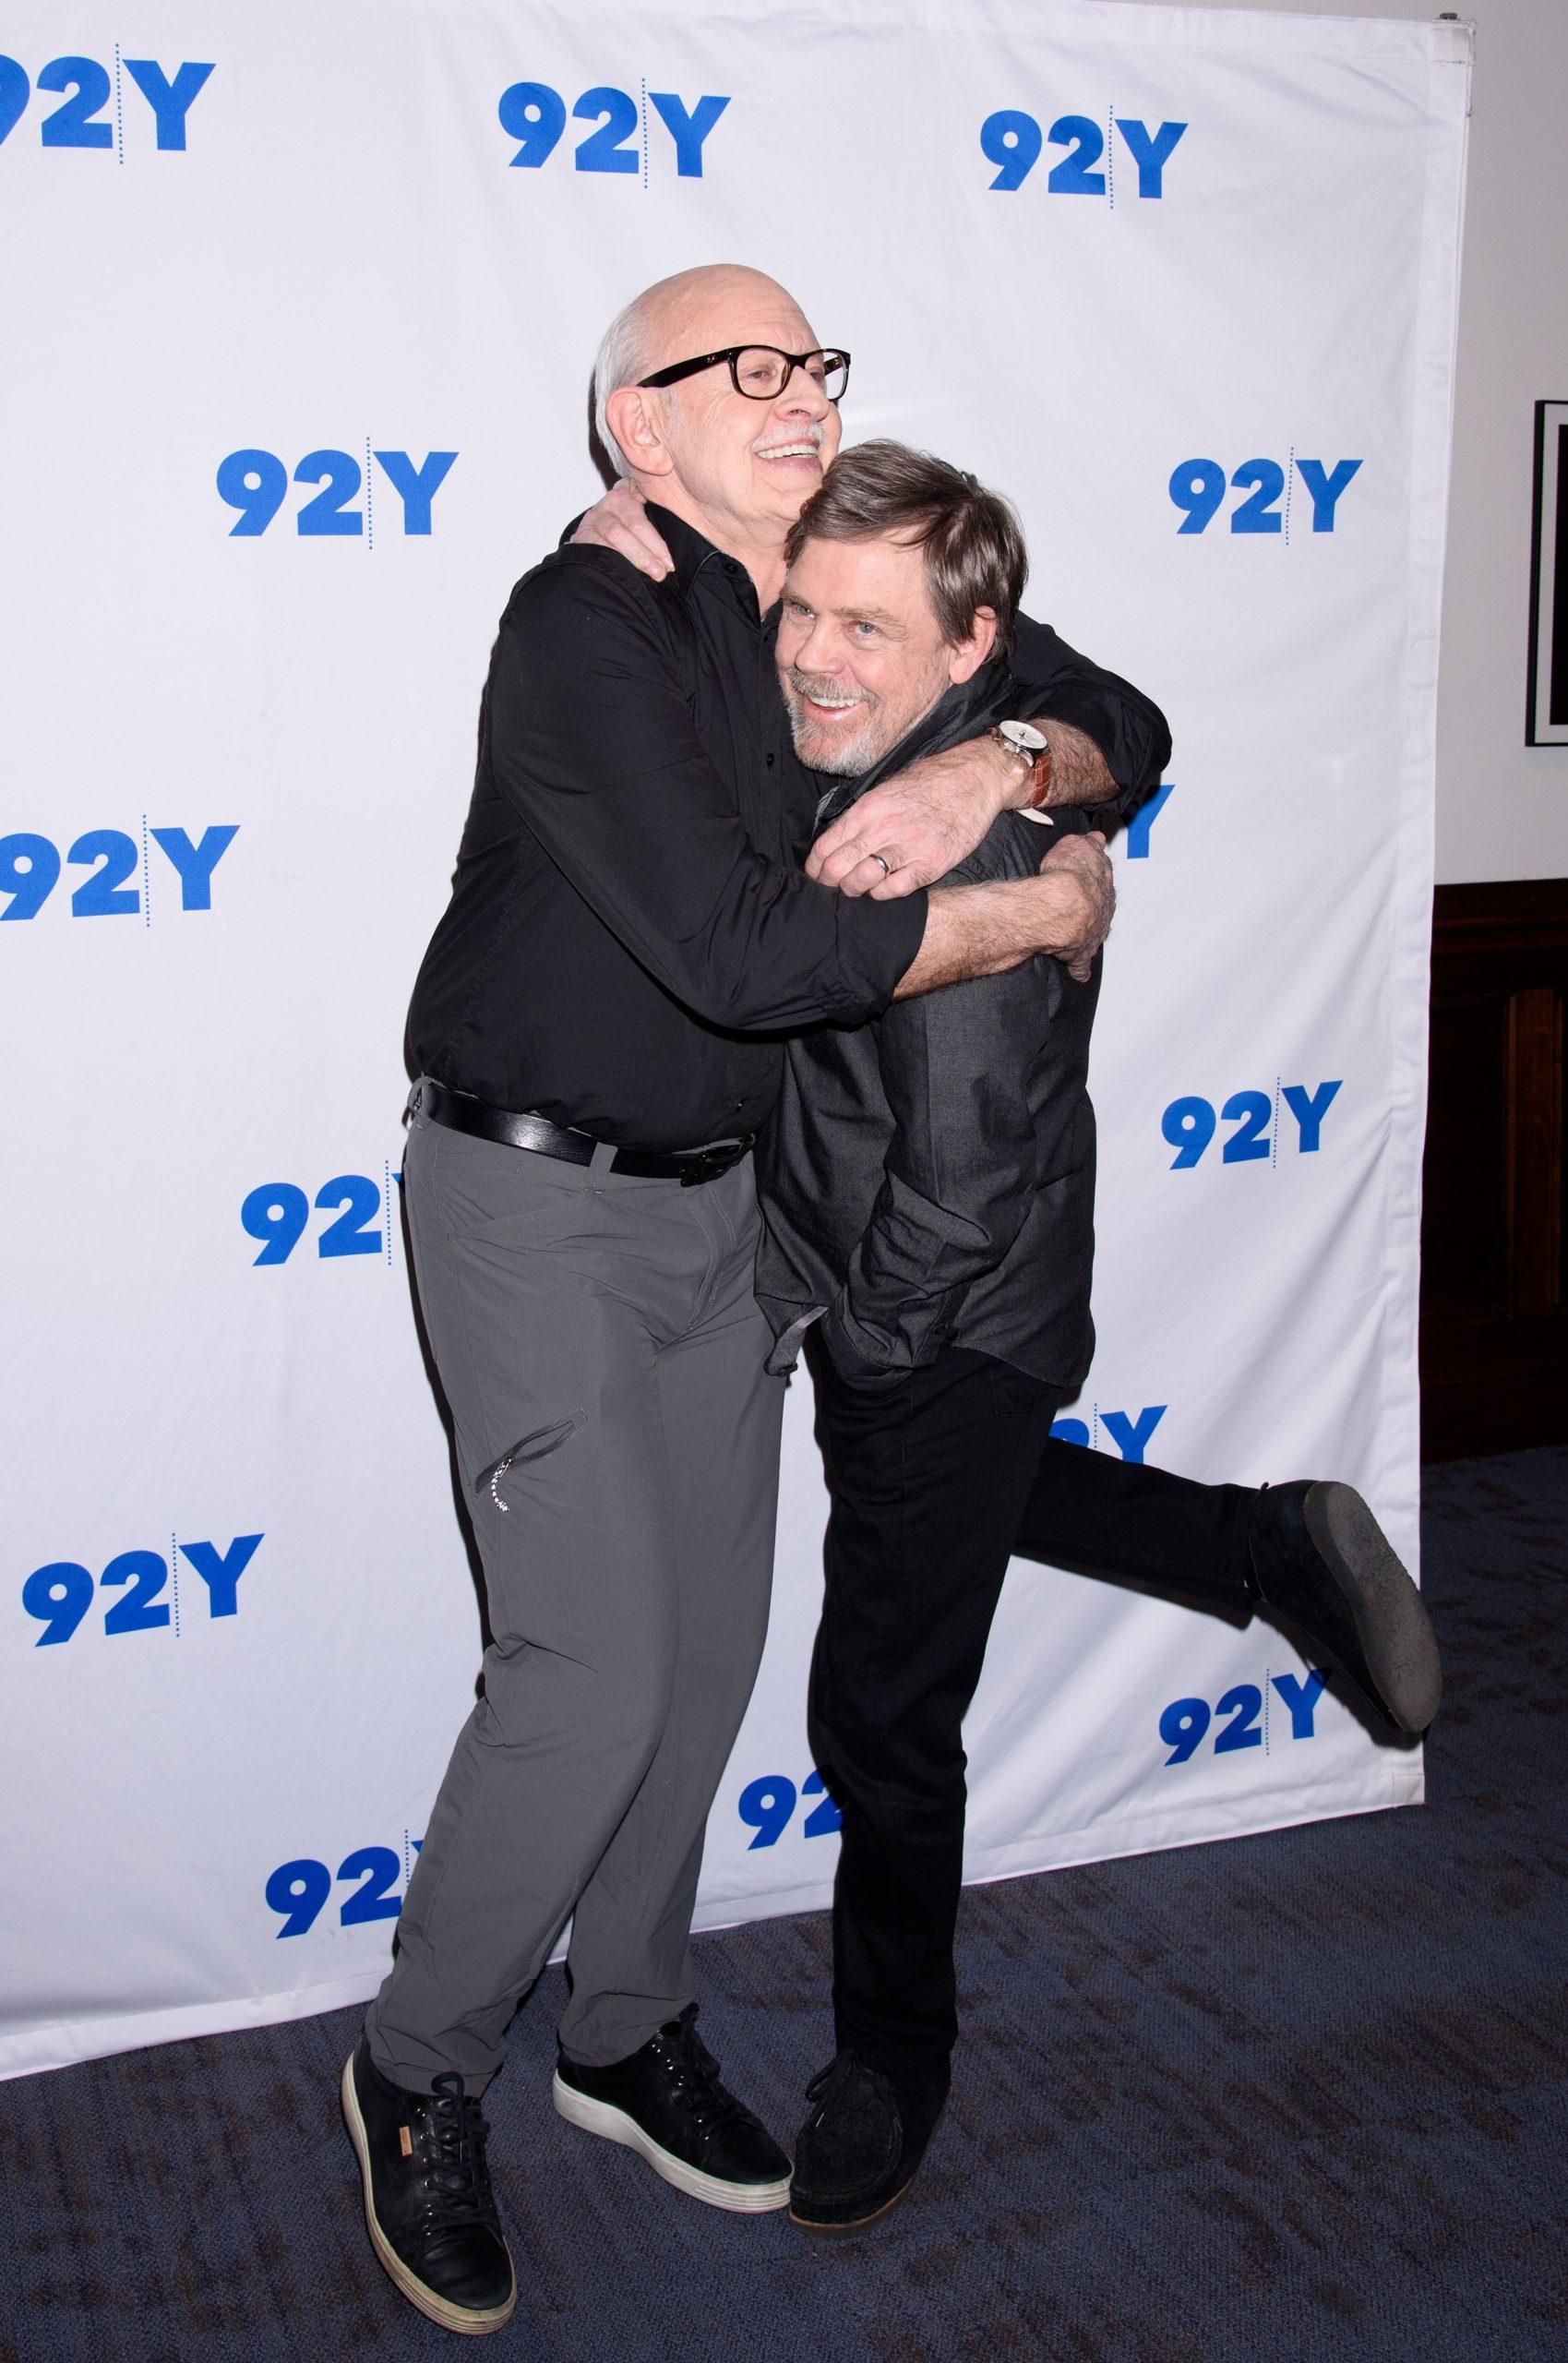 Mark Hamill in Conversation with Frank Oz at 92Y